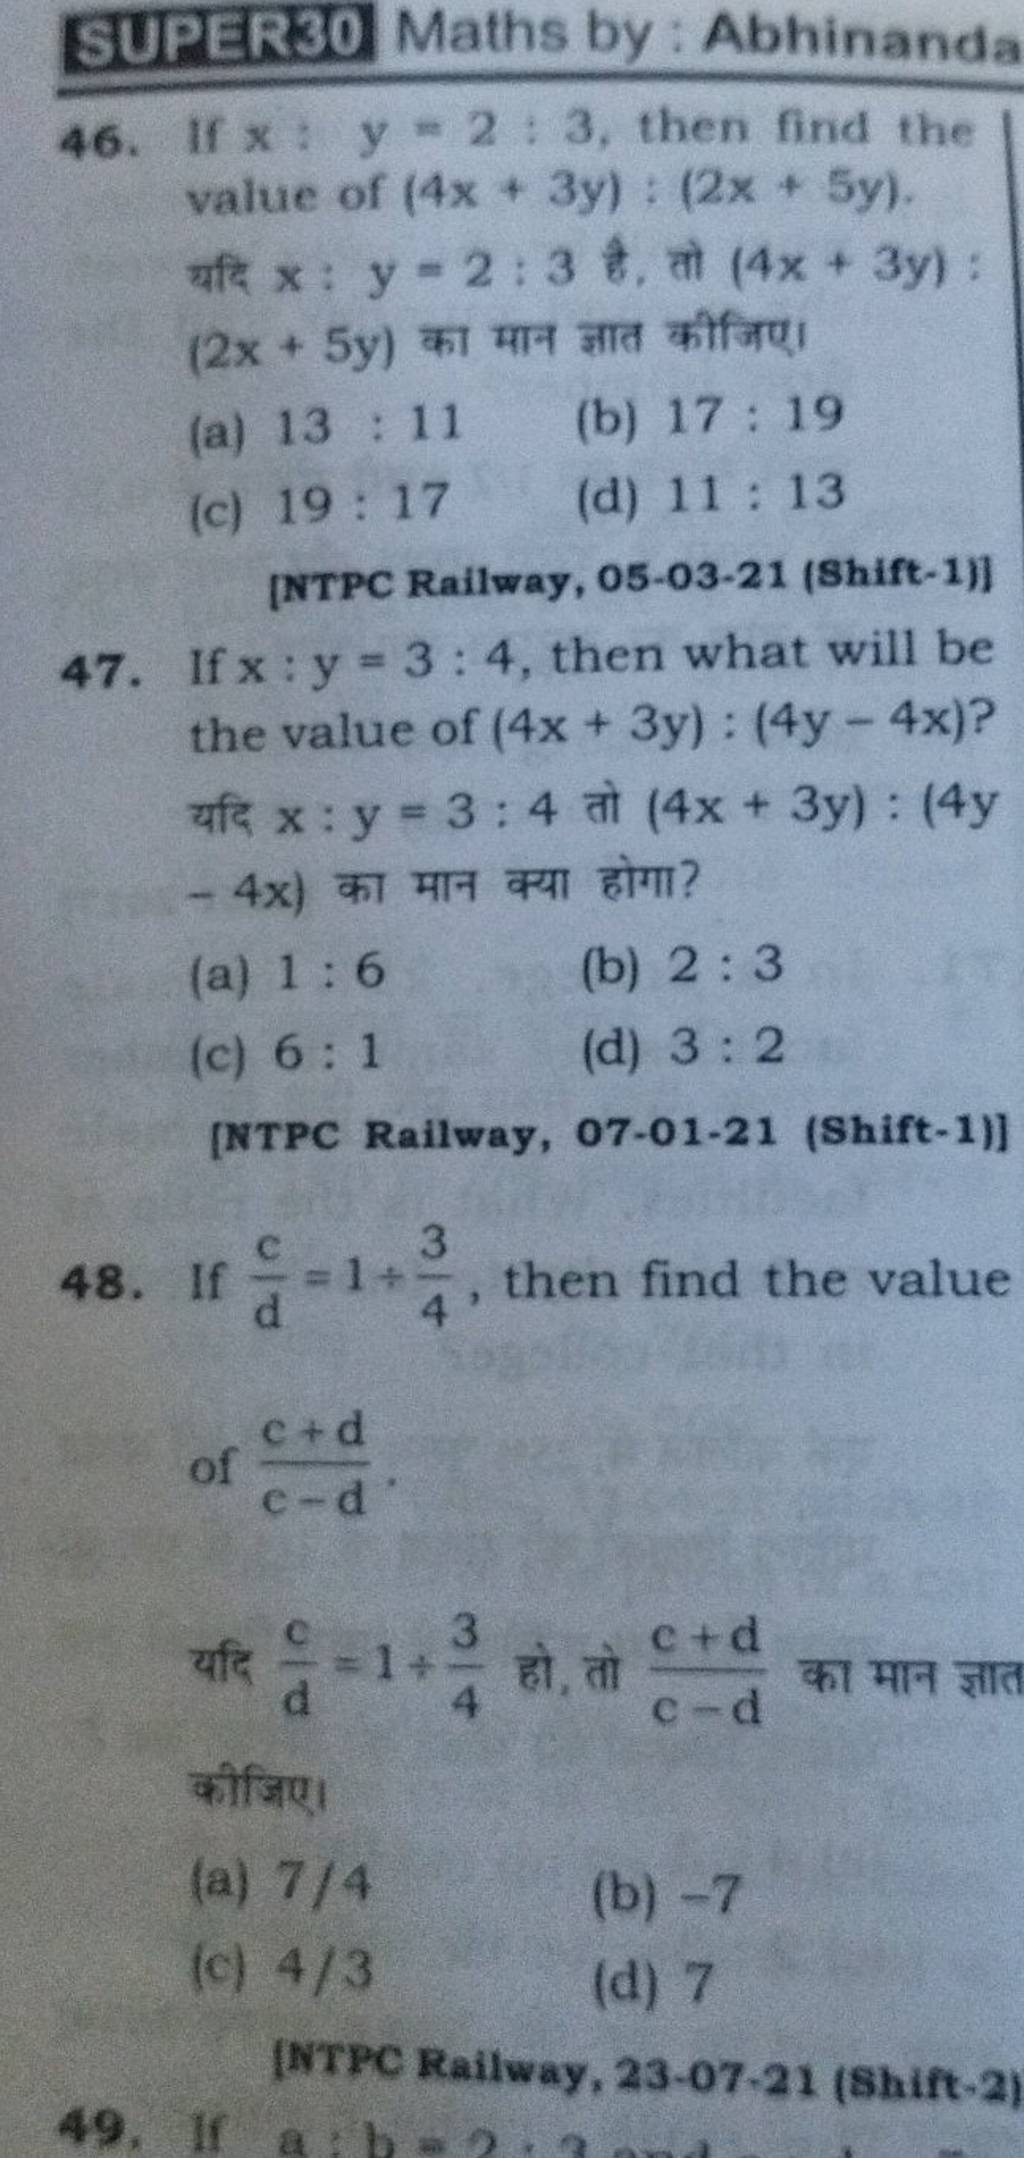 [NTPC Railway, 07-01-21 (Shift-1)] 48. If dc​=1÷43​, then find the val